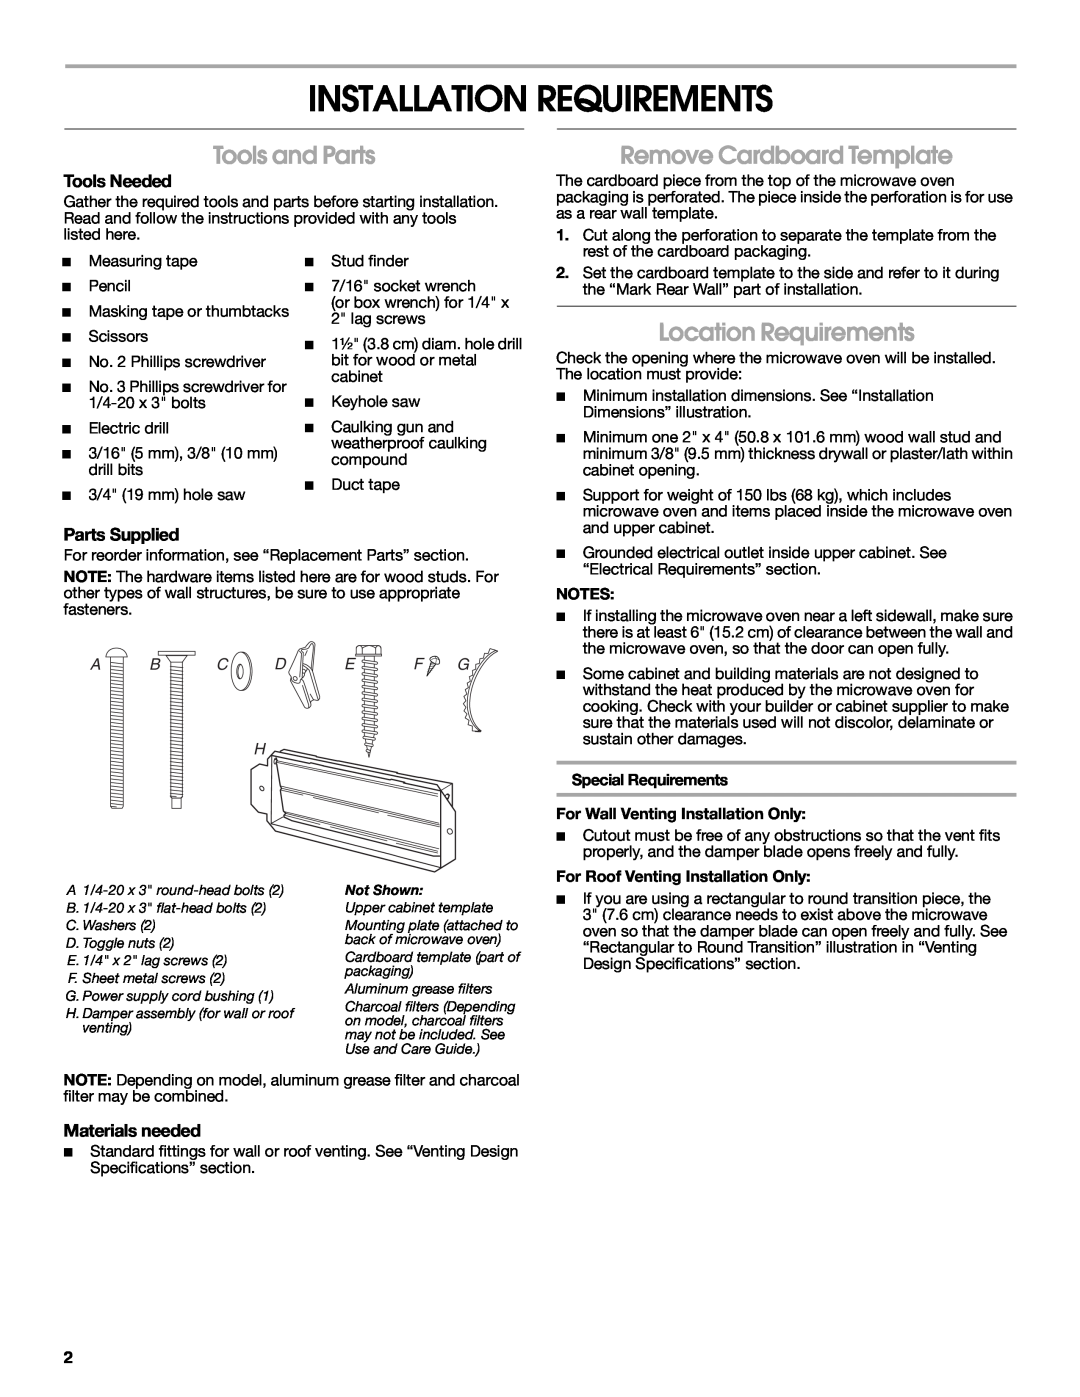 Maytag W10191953A Installation Requirements, Tools and Parts, Remove Cardboard Template, Location Requirements 